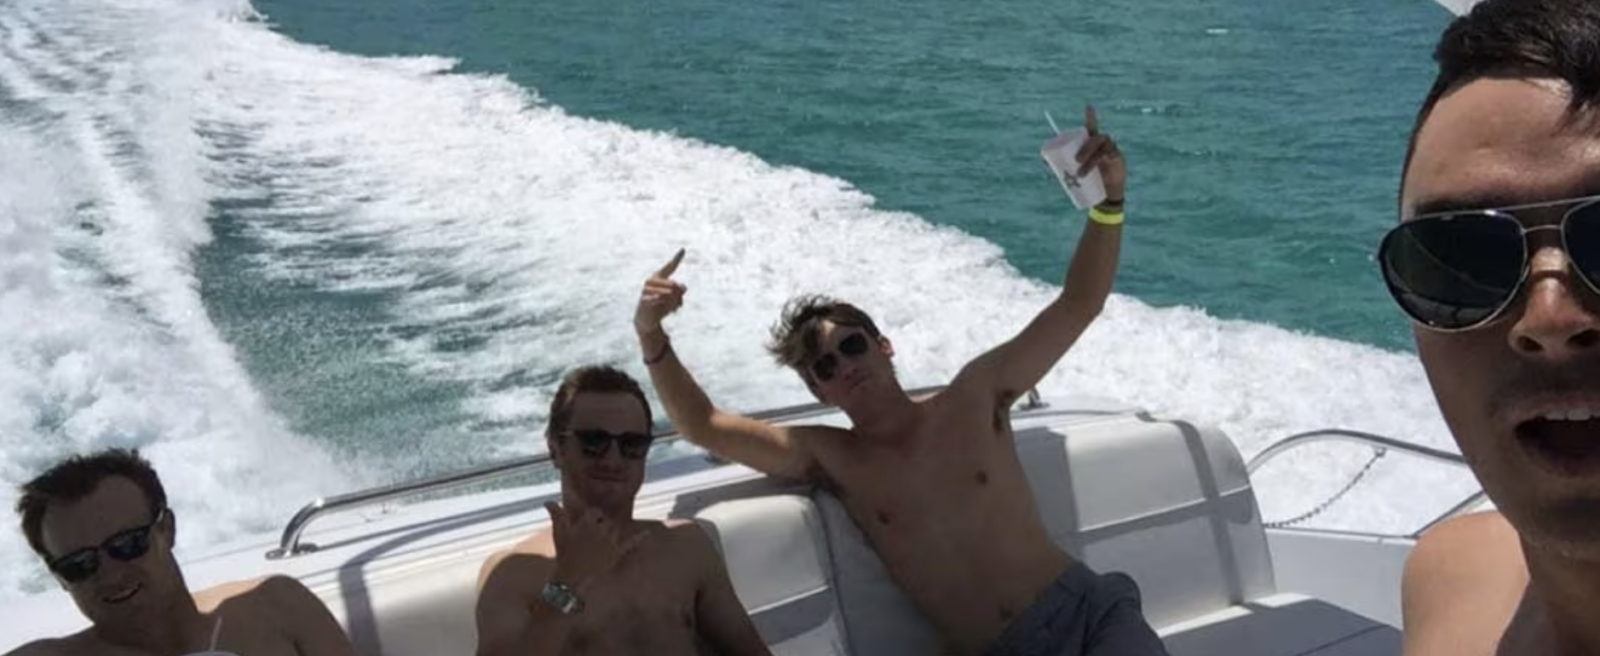 The boys on a boat. About to play in Mexico Open